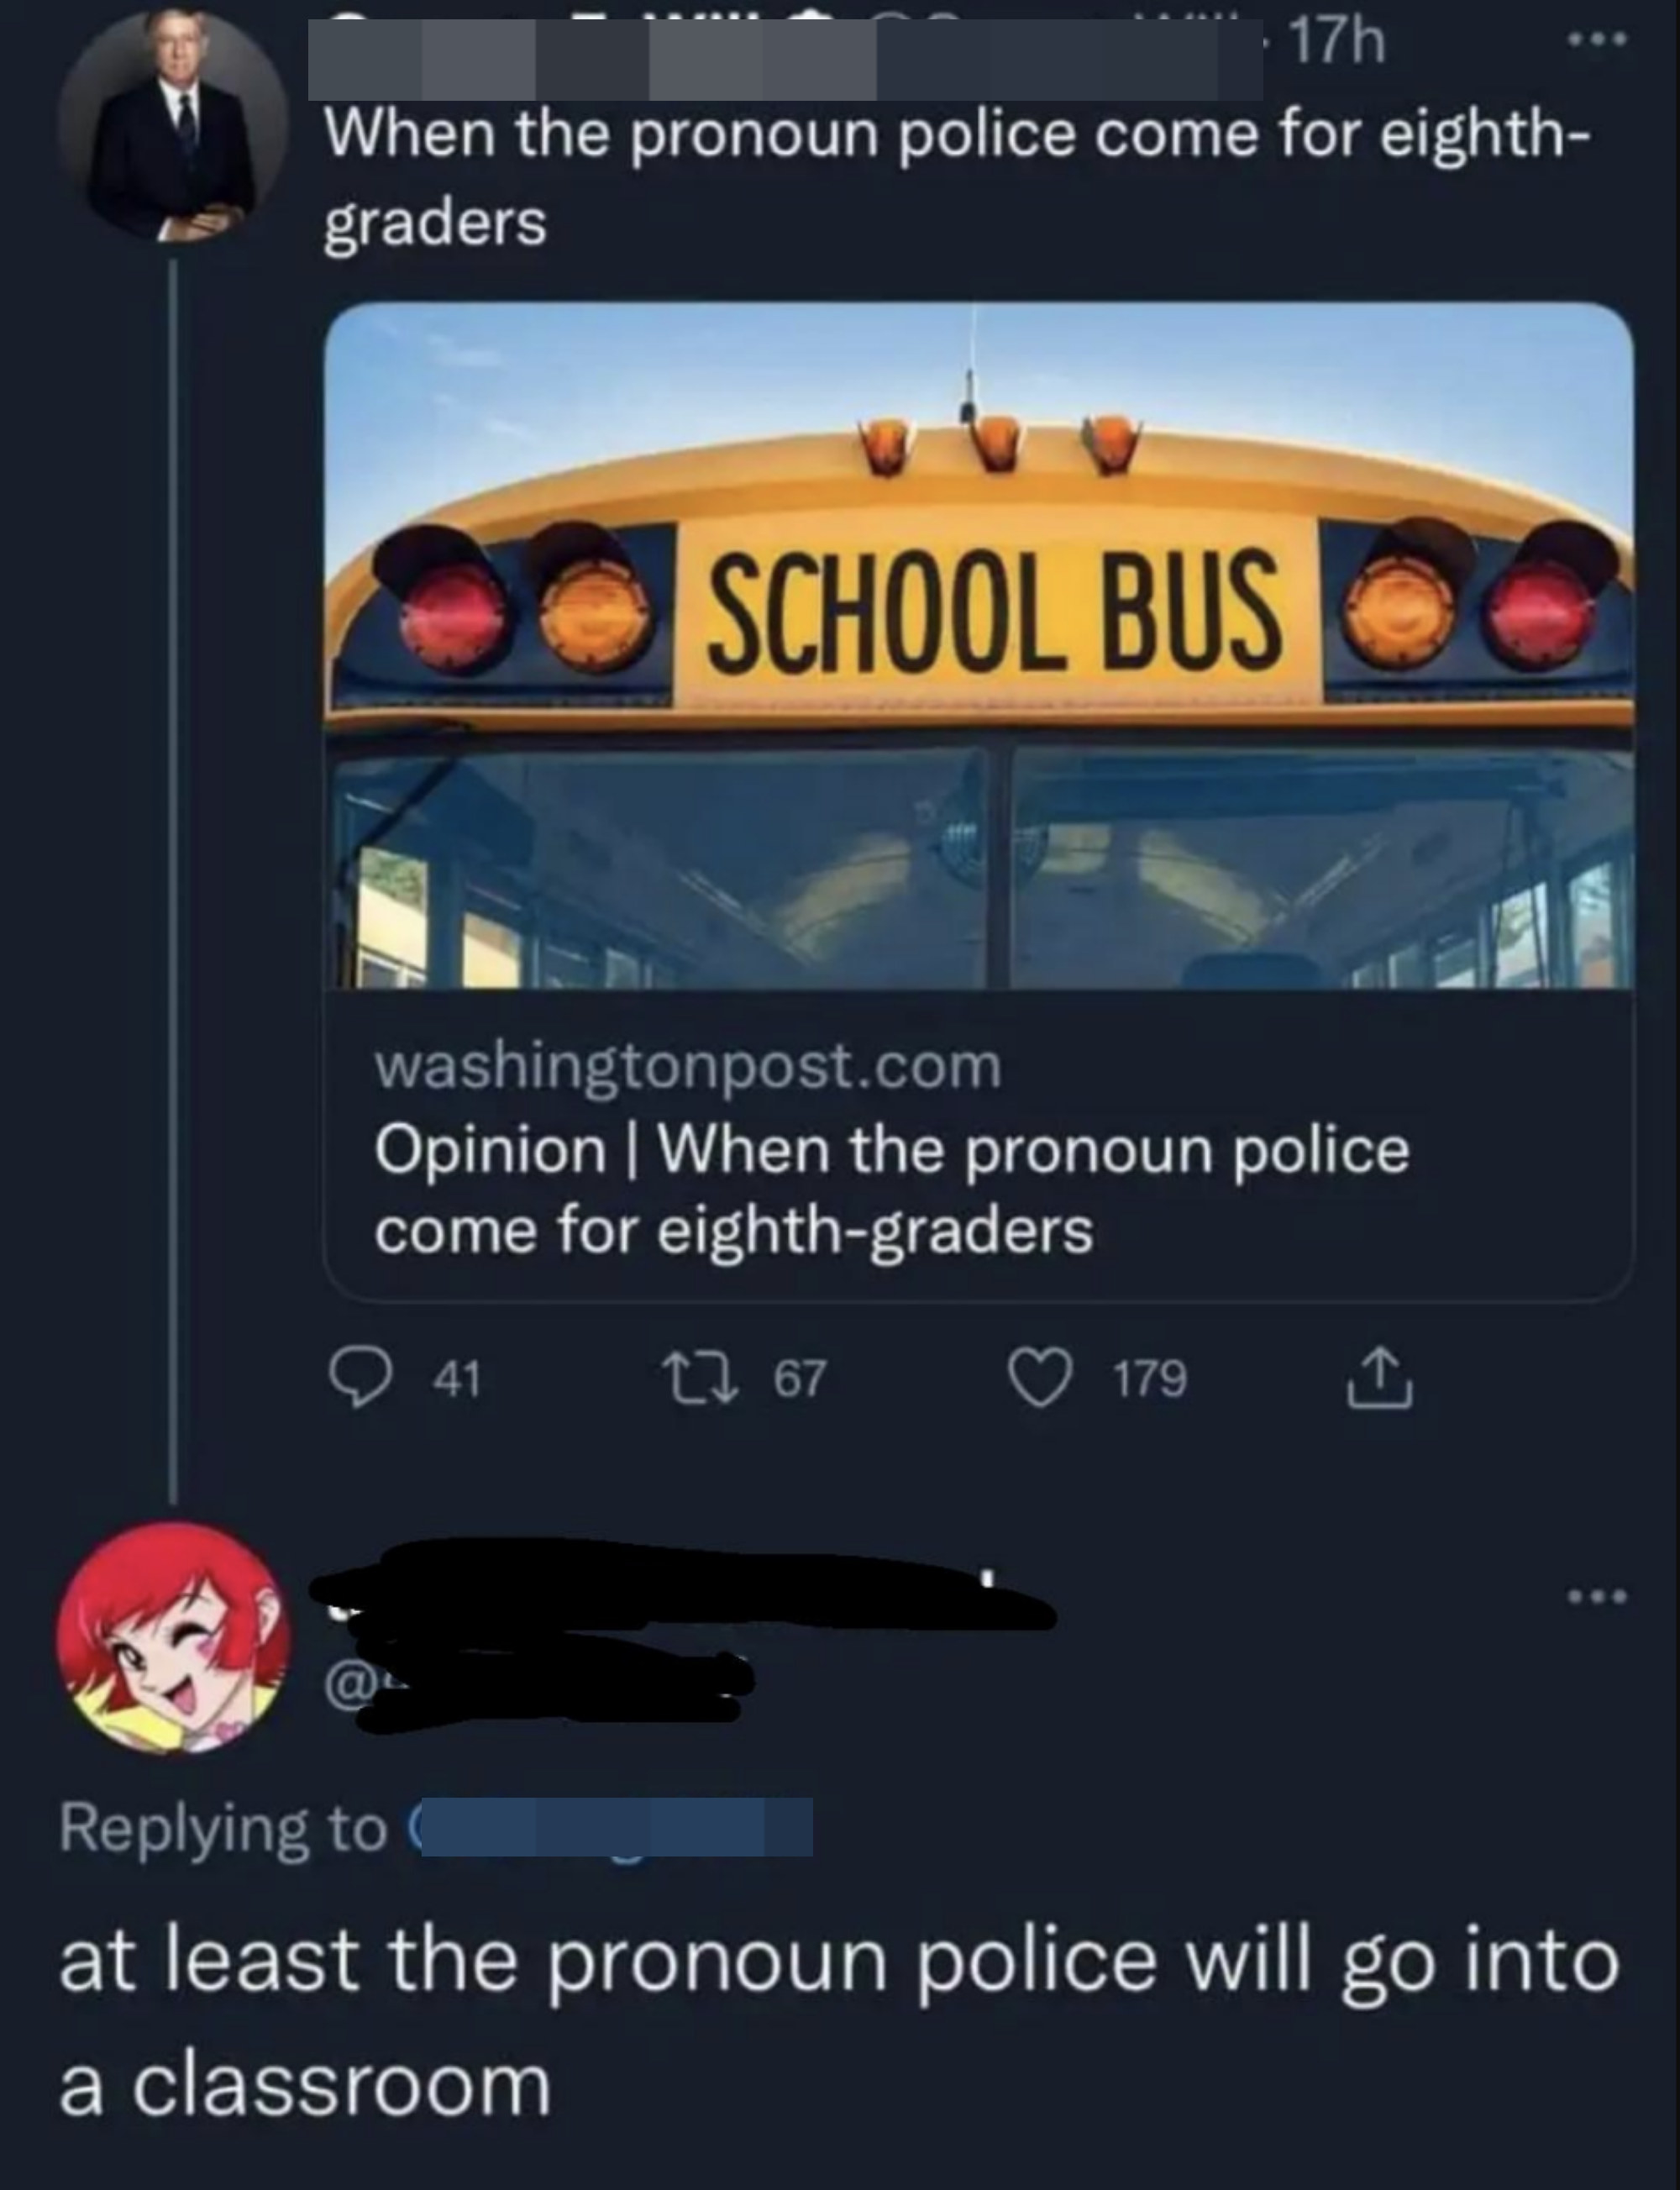 &quot;at lest the pronoun police will go into a classroom&quot;